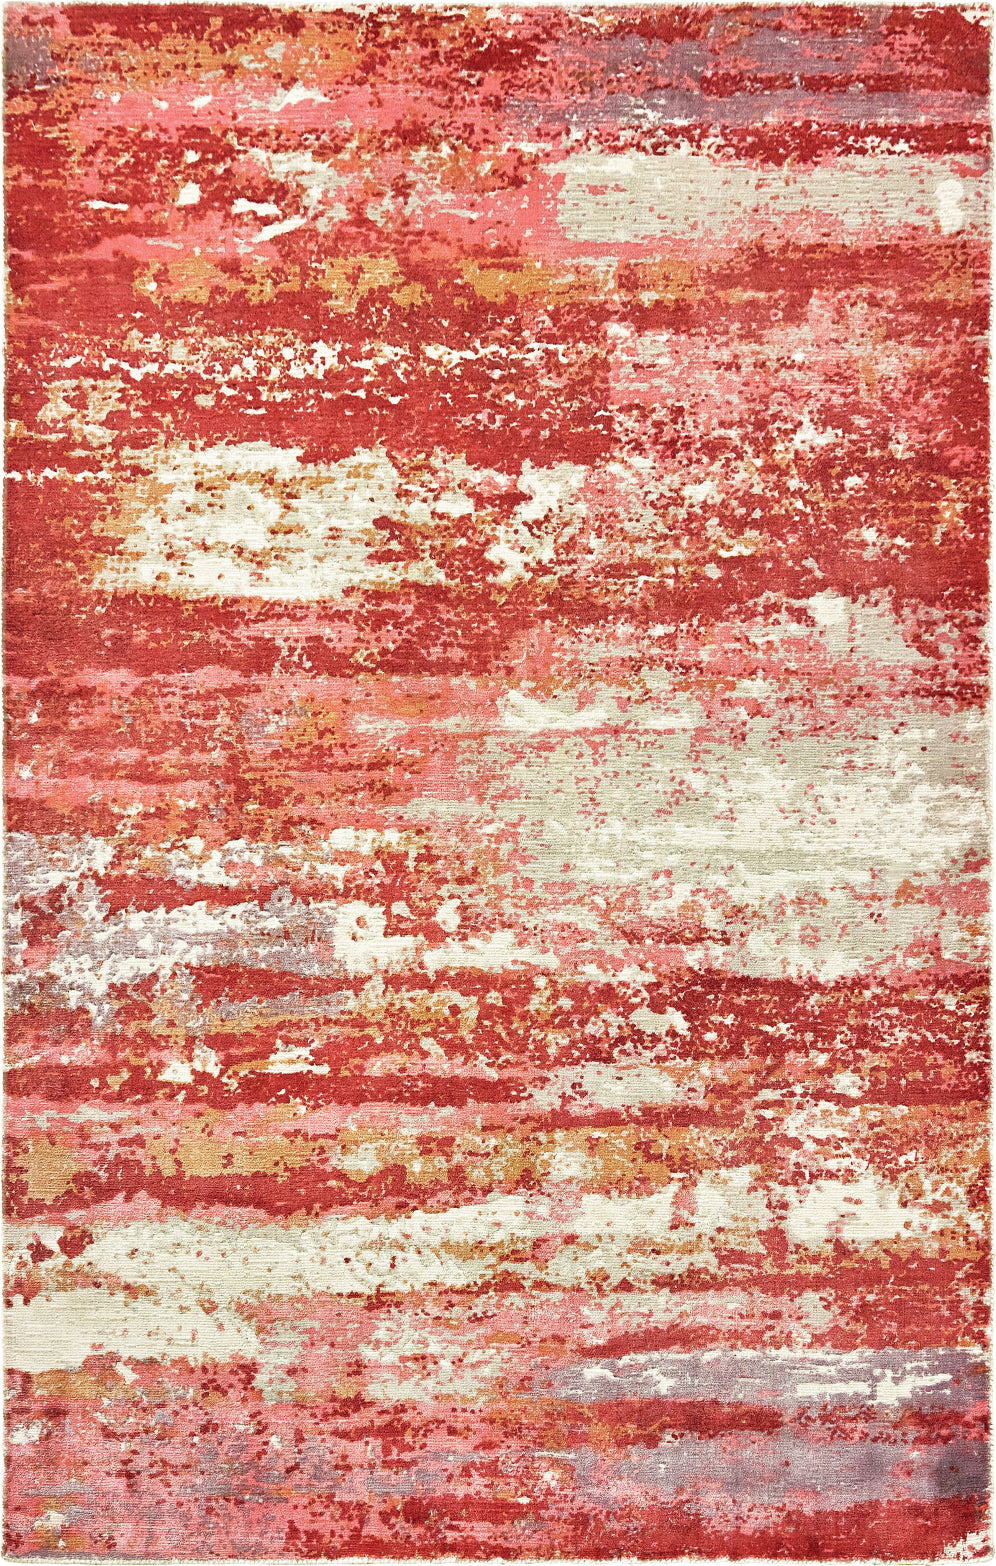 Oriental Weavers Formations 70004 Pink Red Area Rug main image